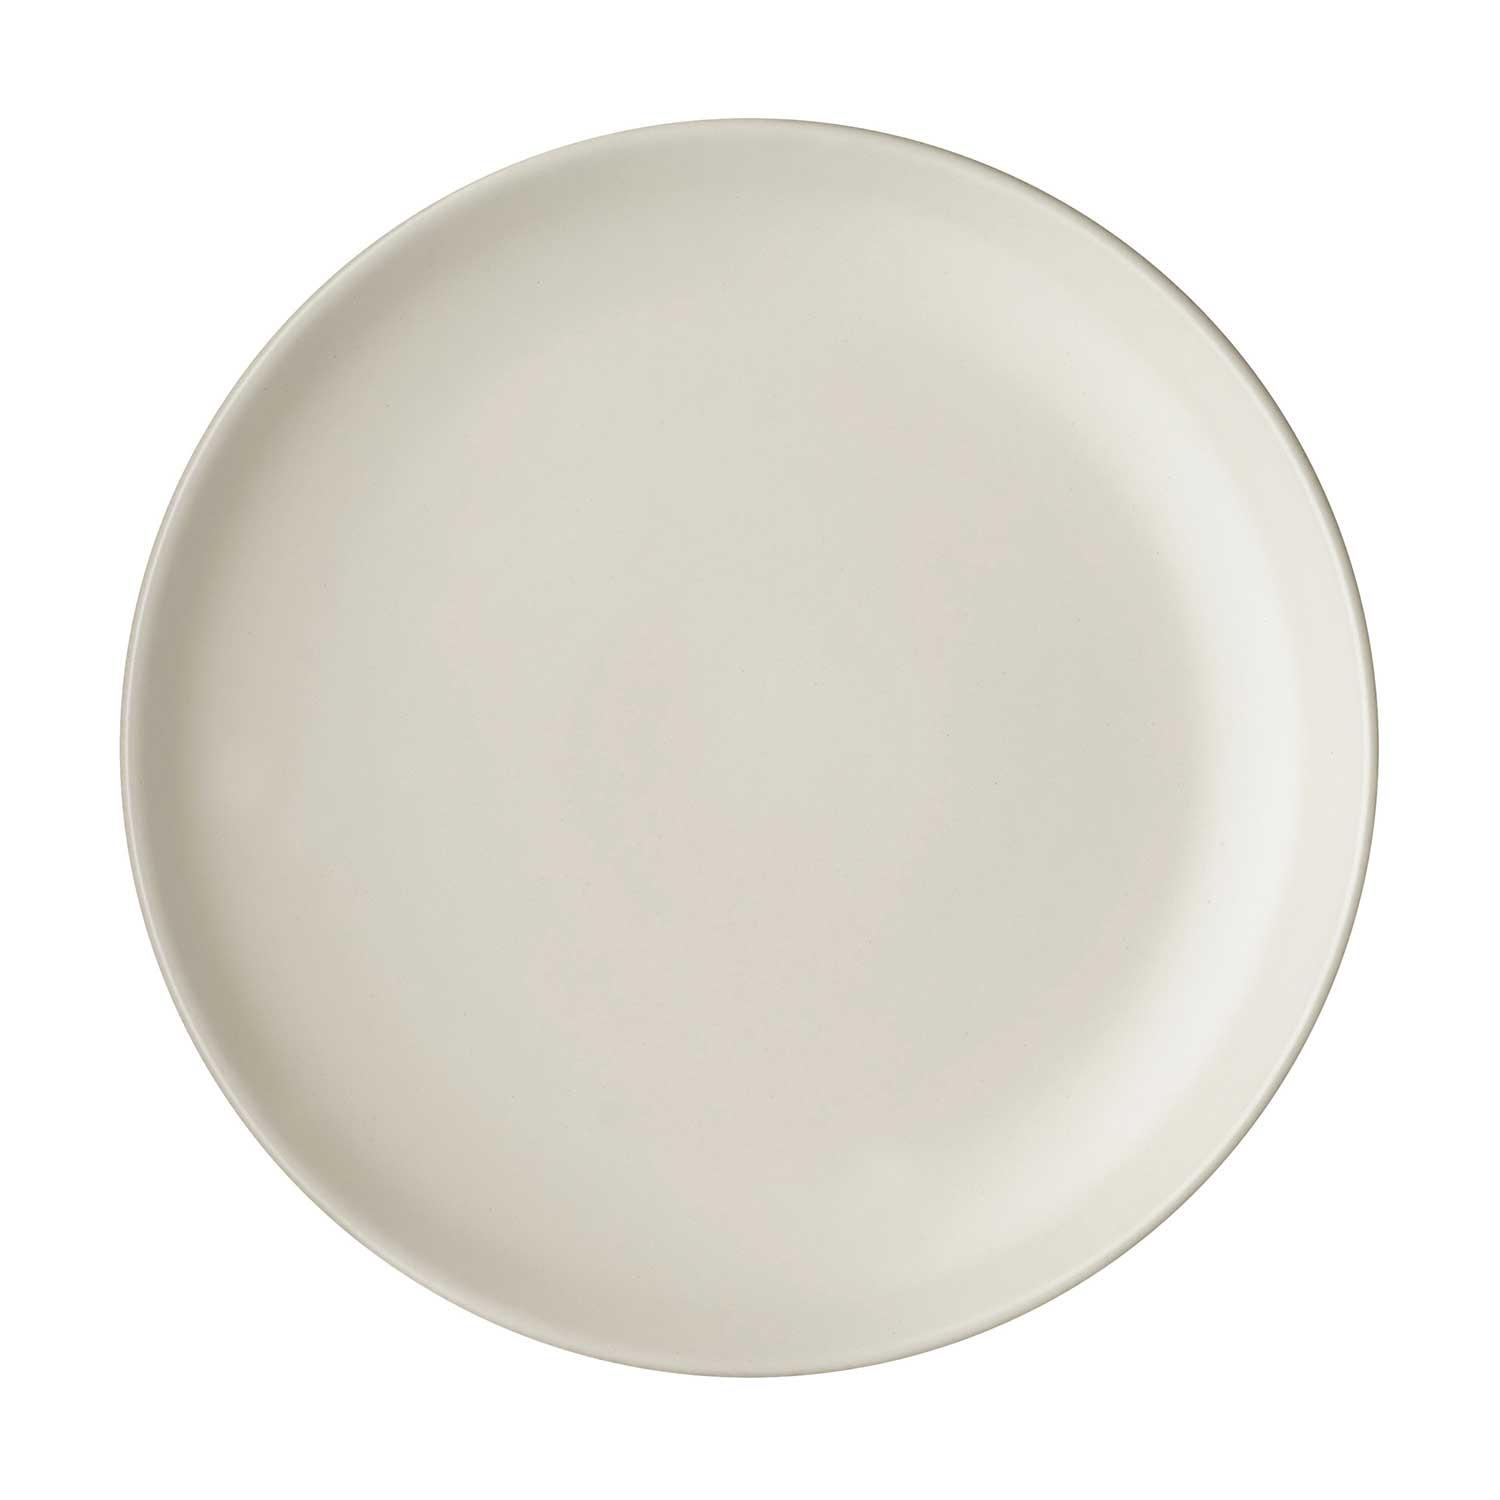 Large Soup Bowl with Lid White Ceramic Plate Round Dinner Plate